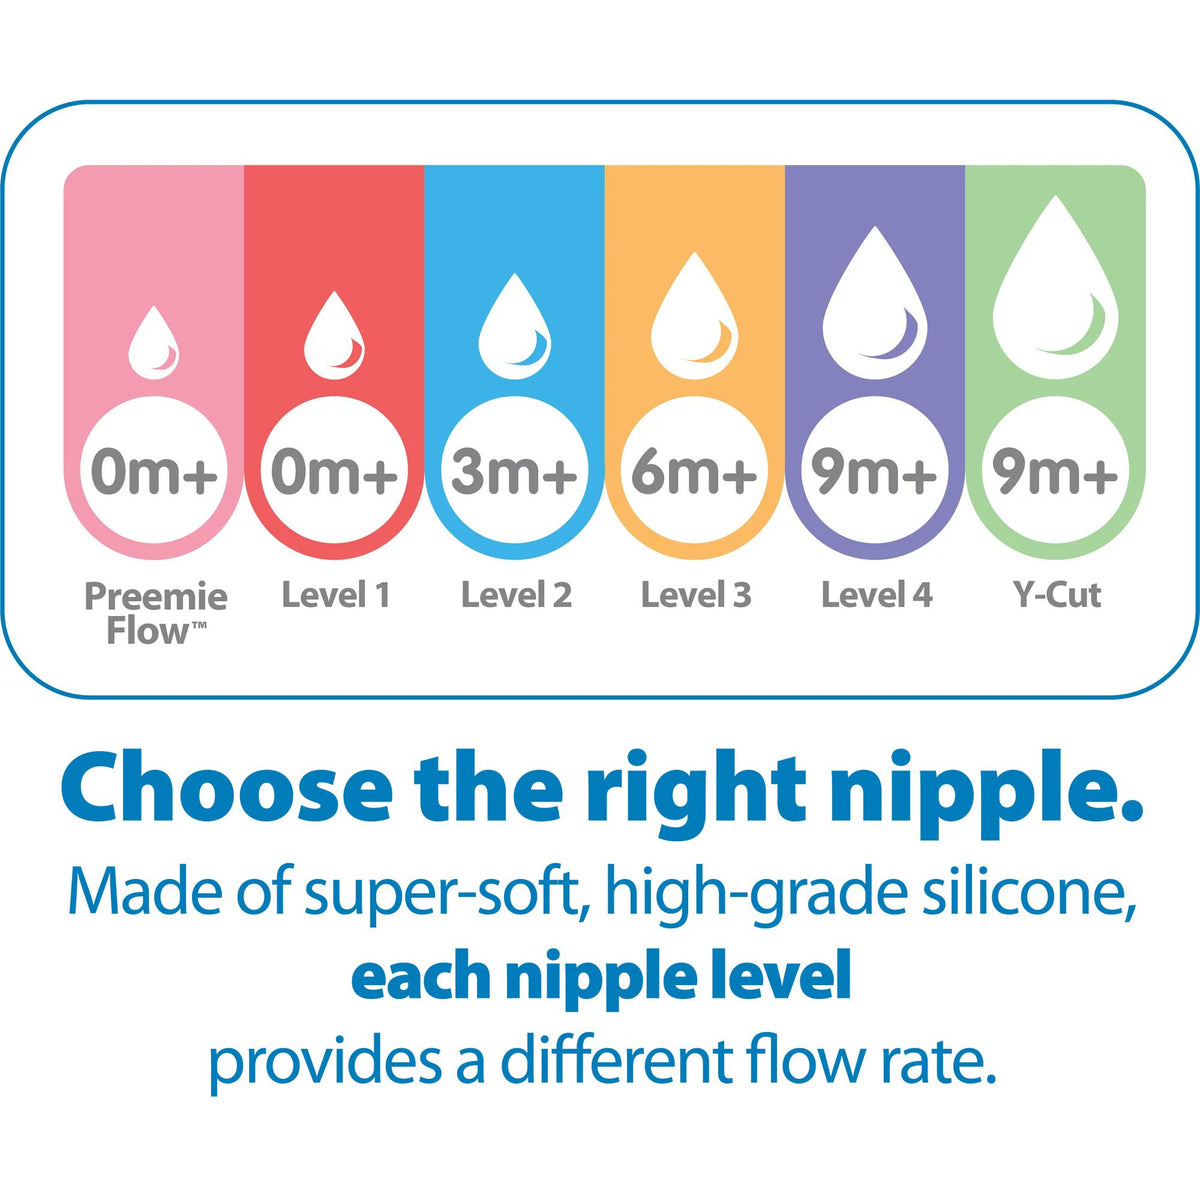 dr-browns-options-breast-like-silicone-nipples-2s-level-3-germany-6m- (4)